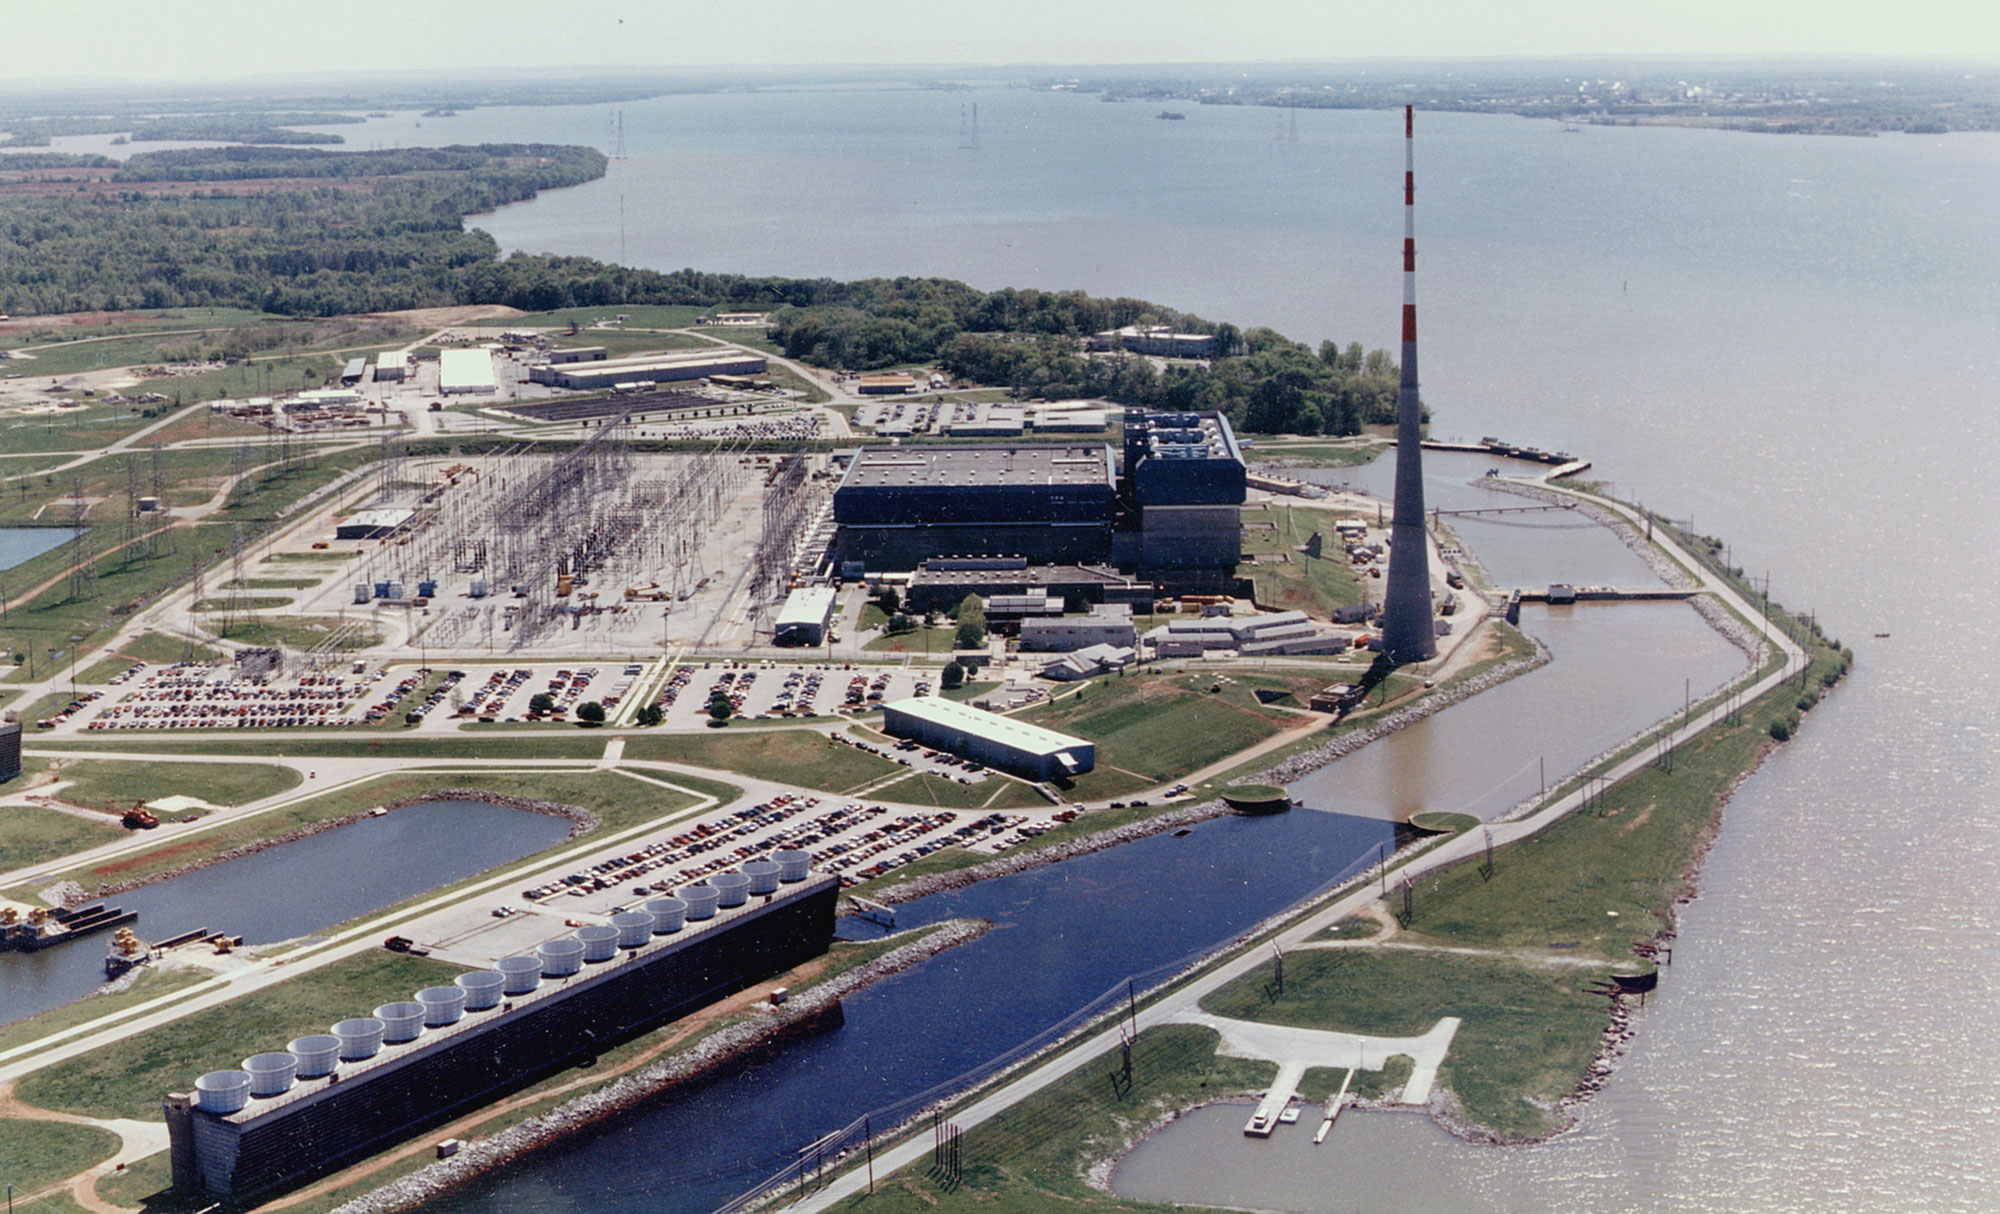 Photograph of the Browns Ferry Nuclear Power Plant on the Tennessee River.